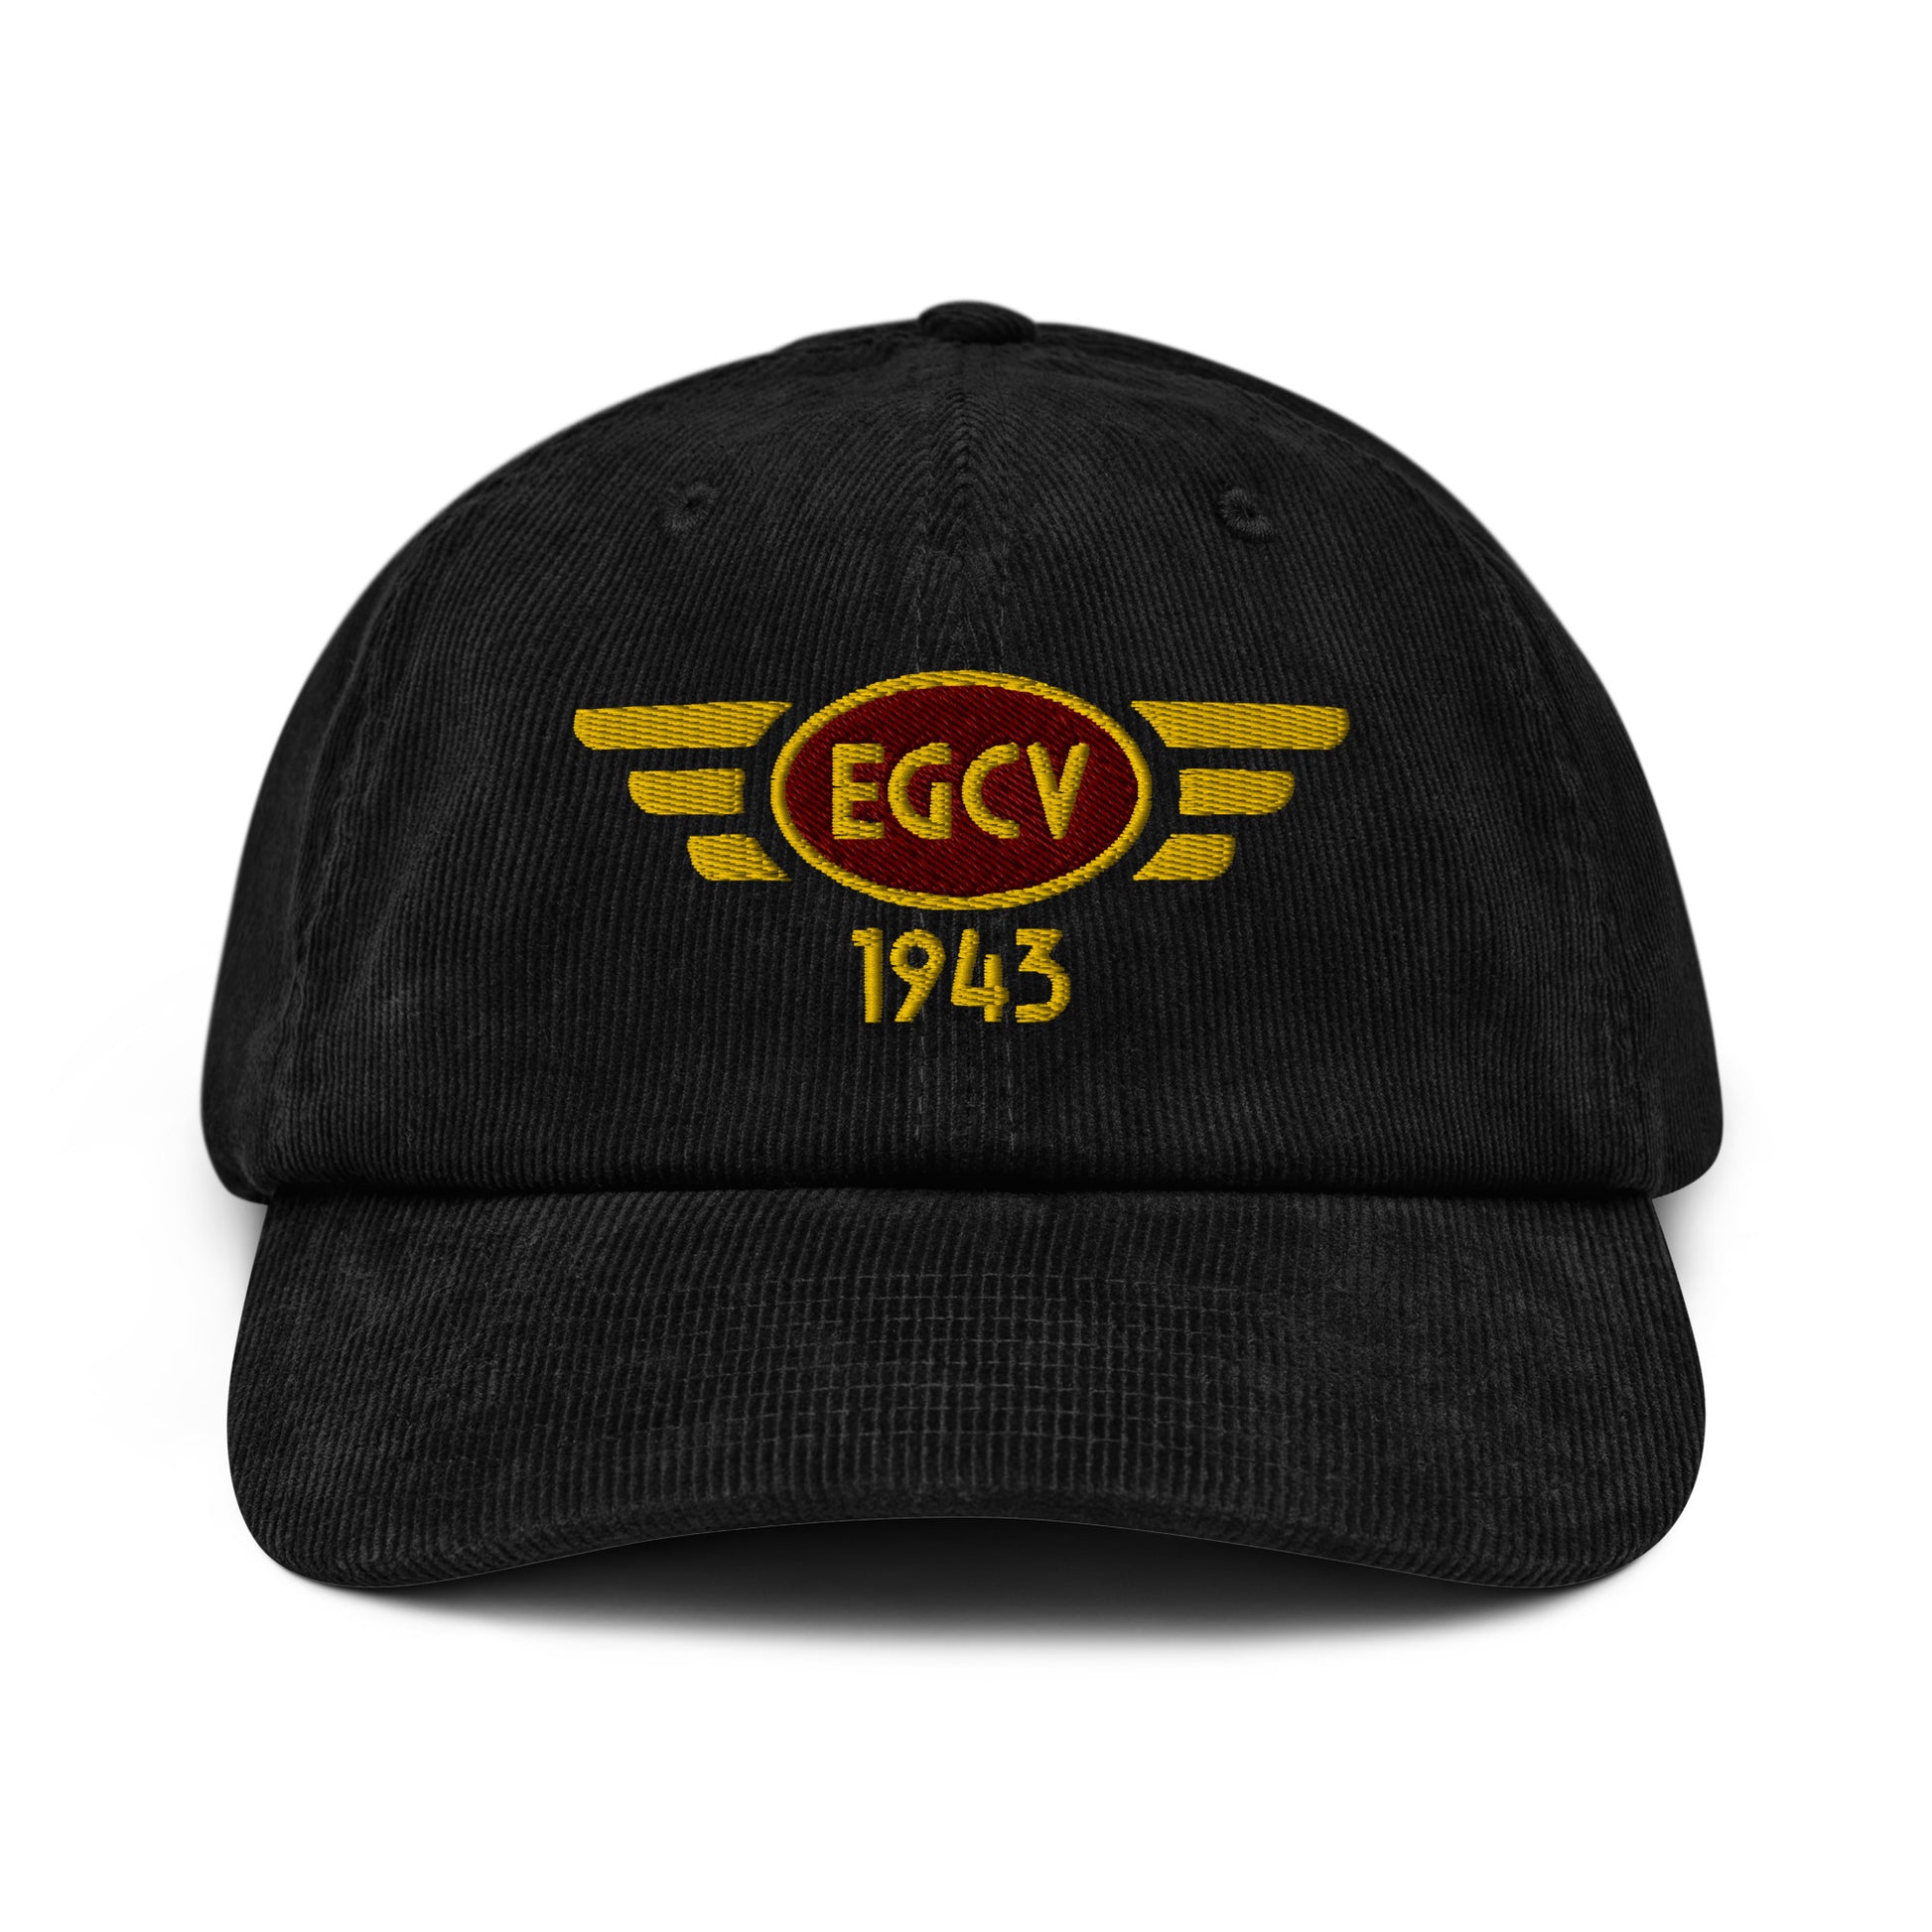 Black corduroy baseball cap with embroidered vintage style aviation logo for Sleap Airfield.